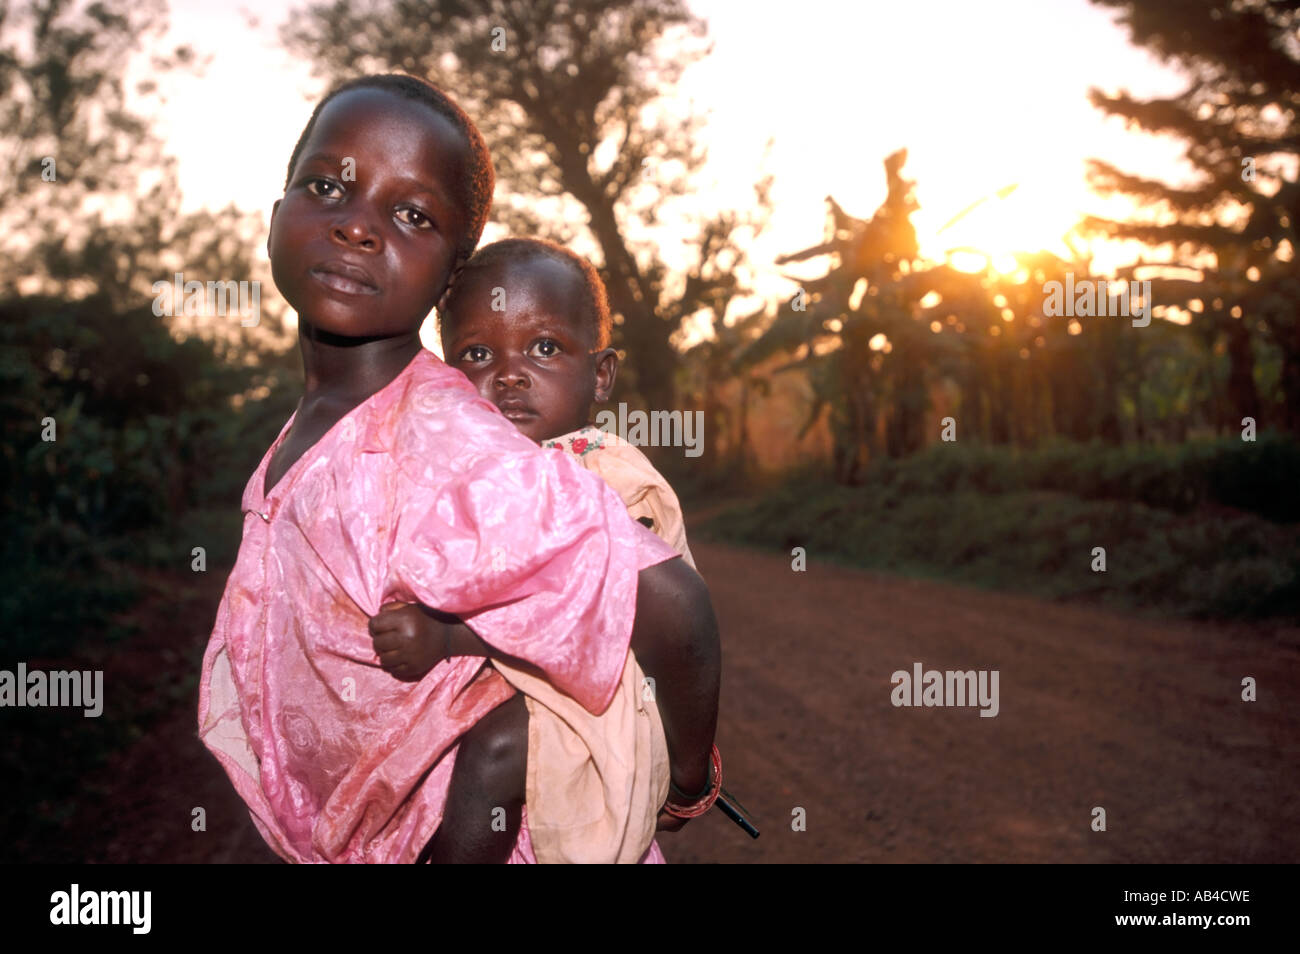 Sad looking young teenage local girl carrying a baby on her back. Stock Photo